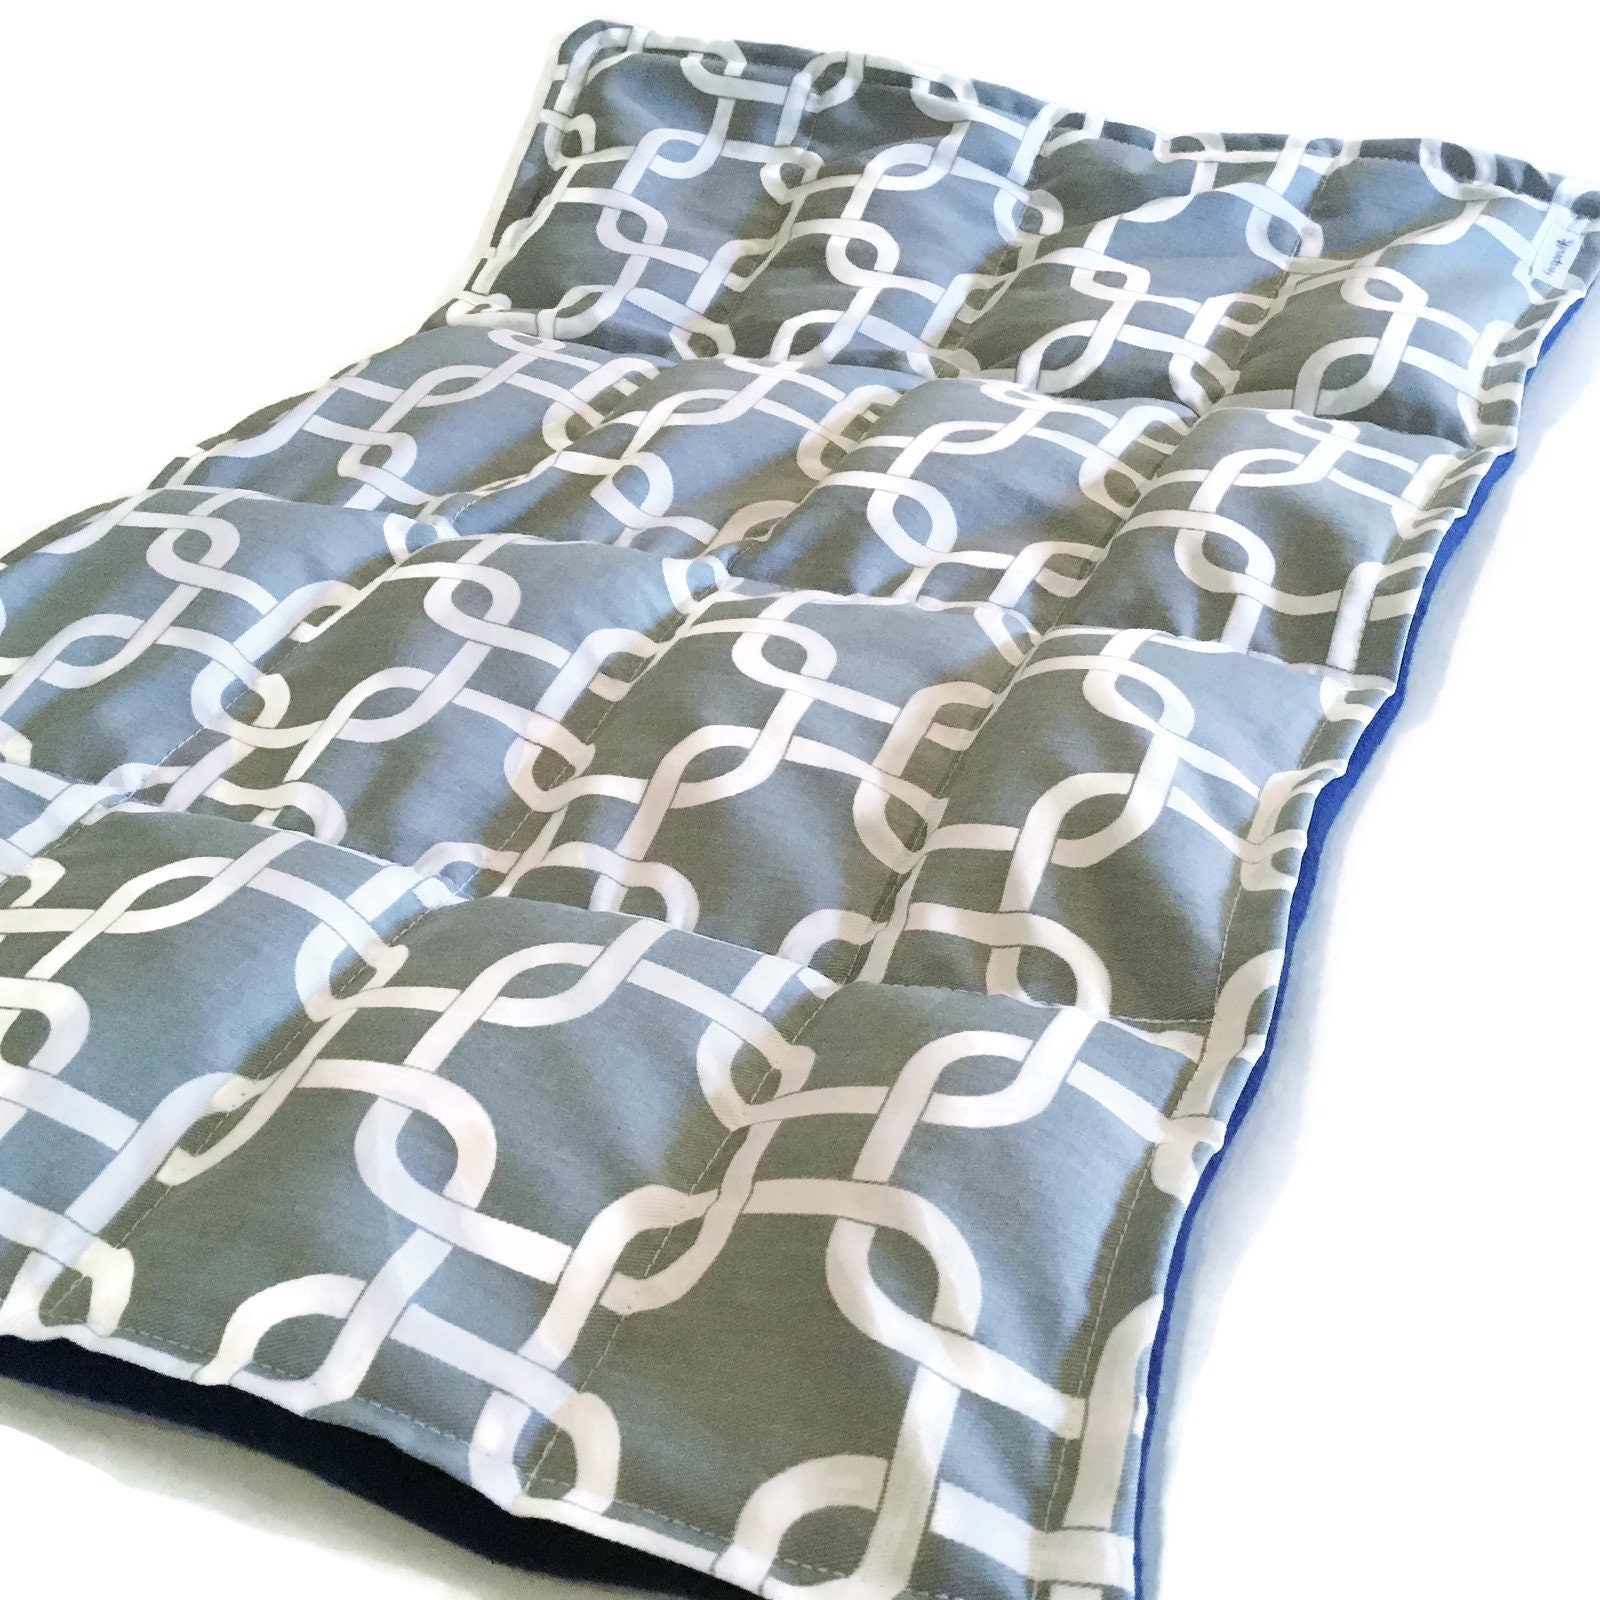 Heated Weighted Blanket for Comfort, Pain Relief, Neuro Issues like